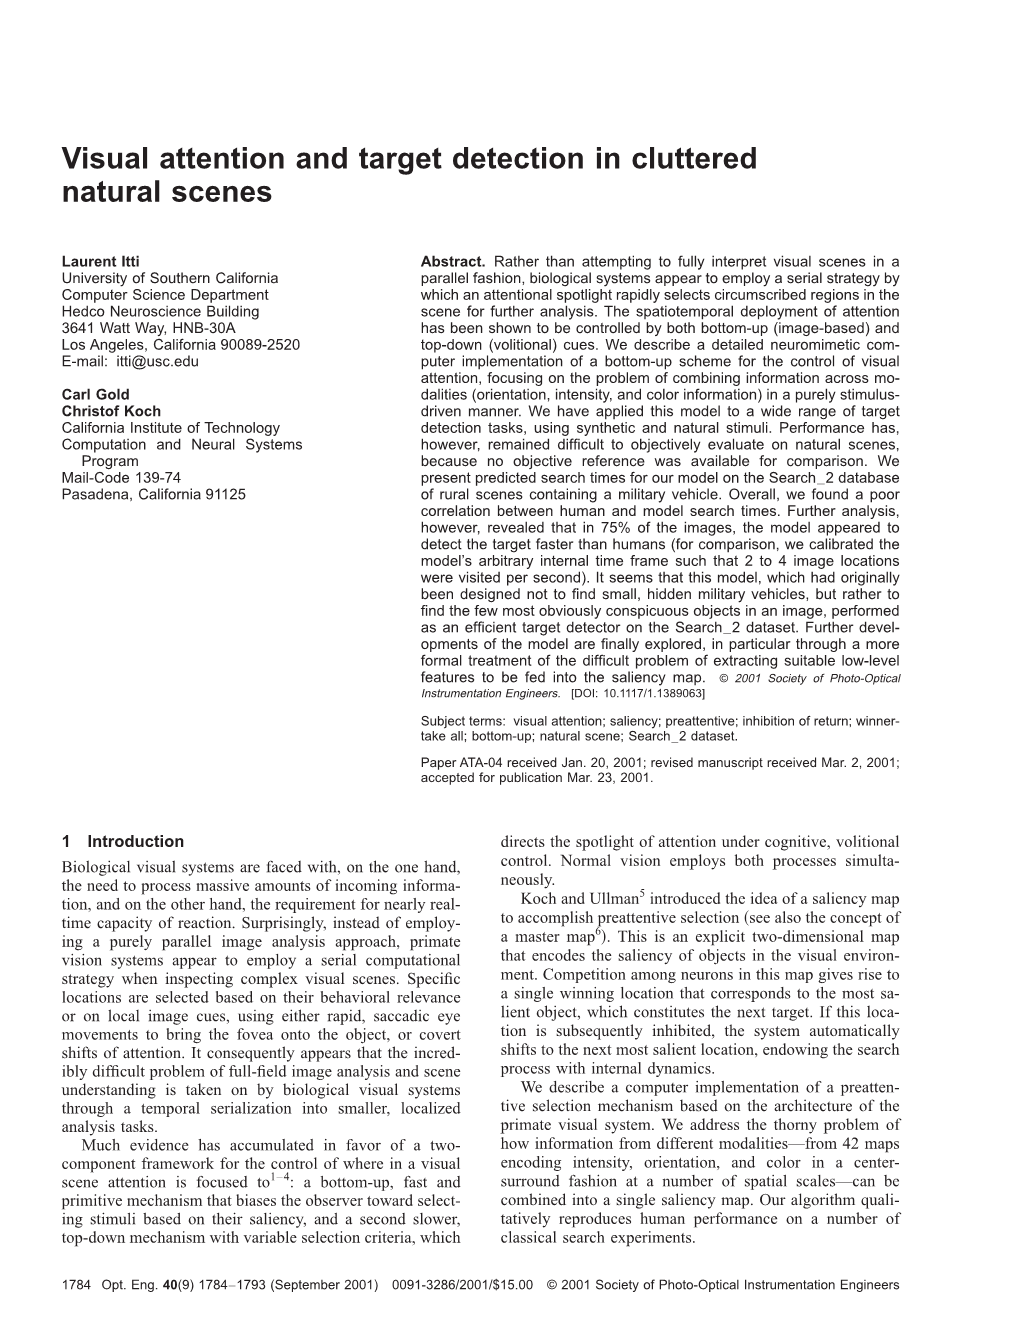 Visual Attention and Target Detection in Cluttered Natural Scenes